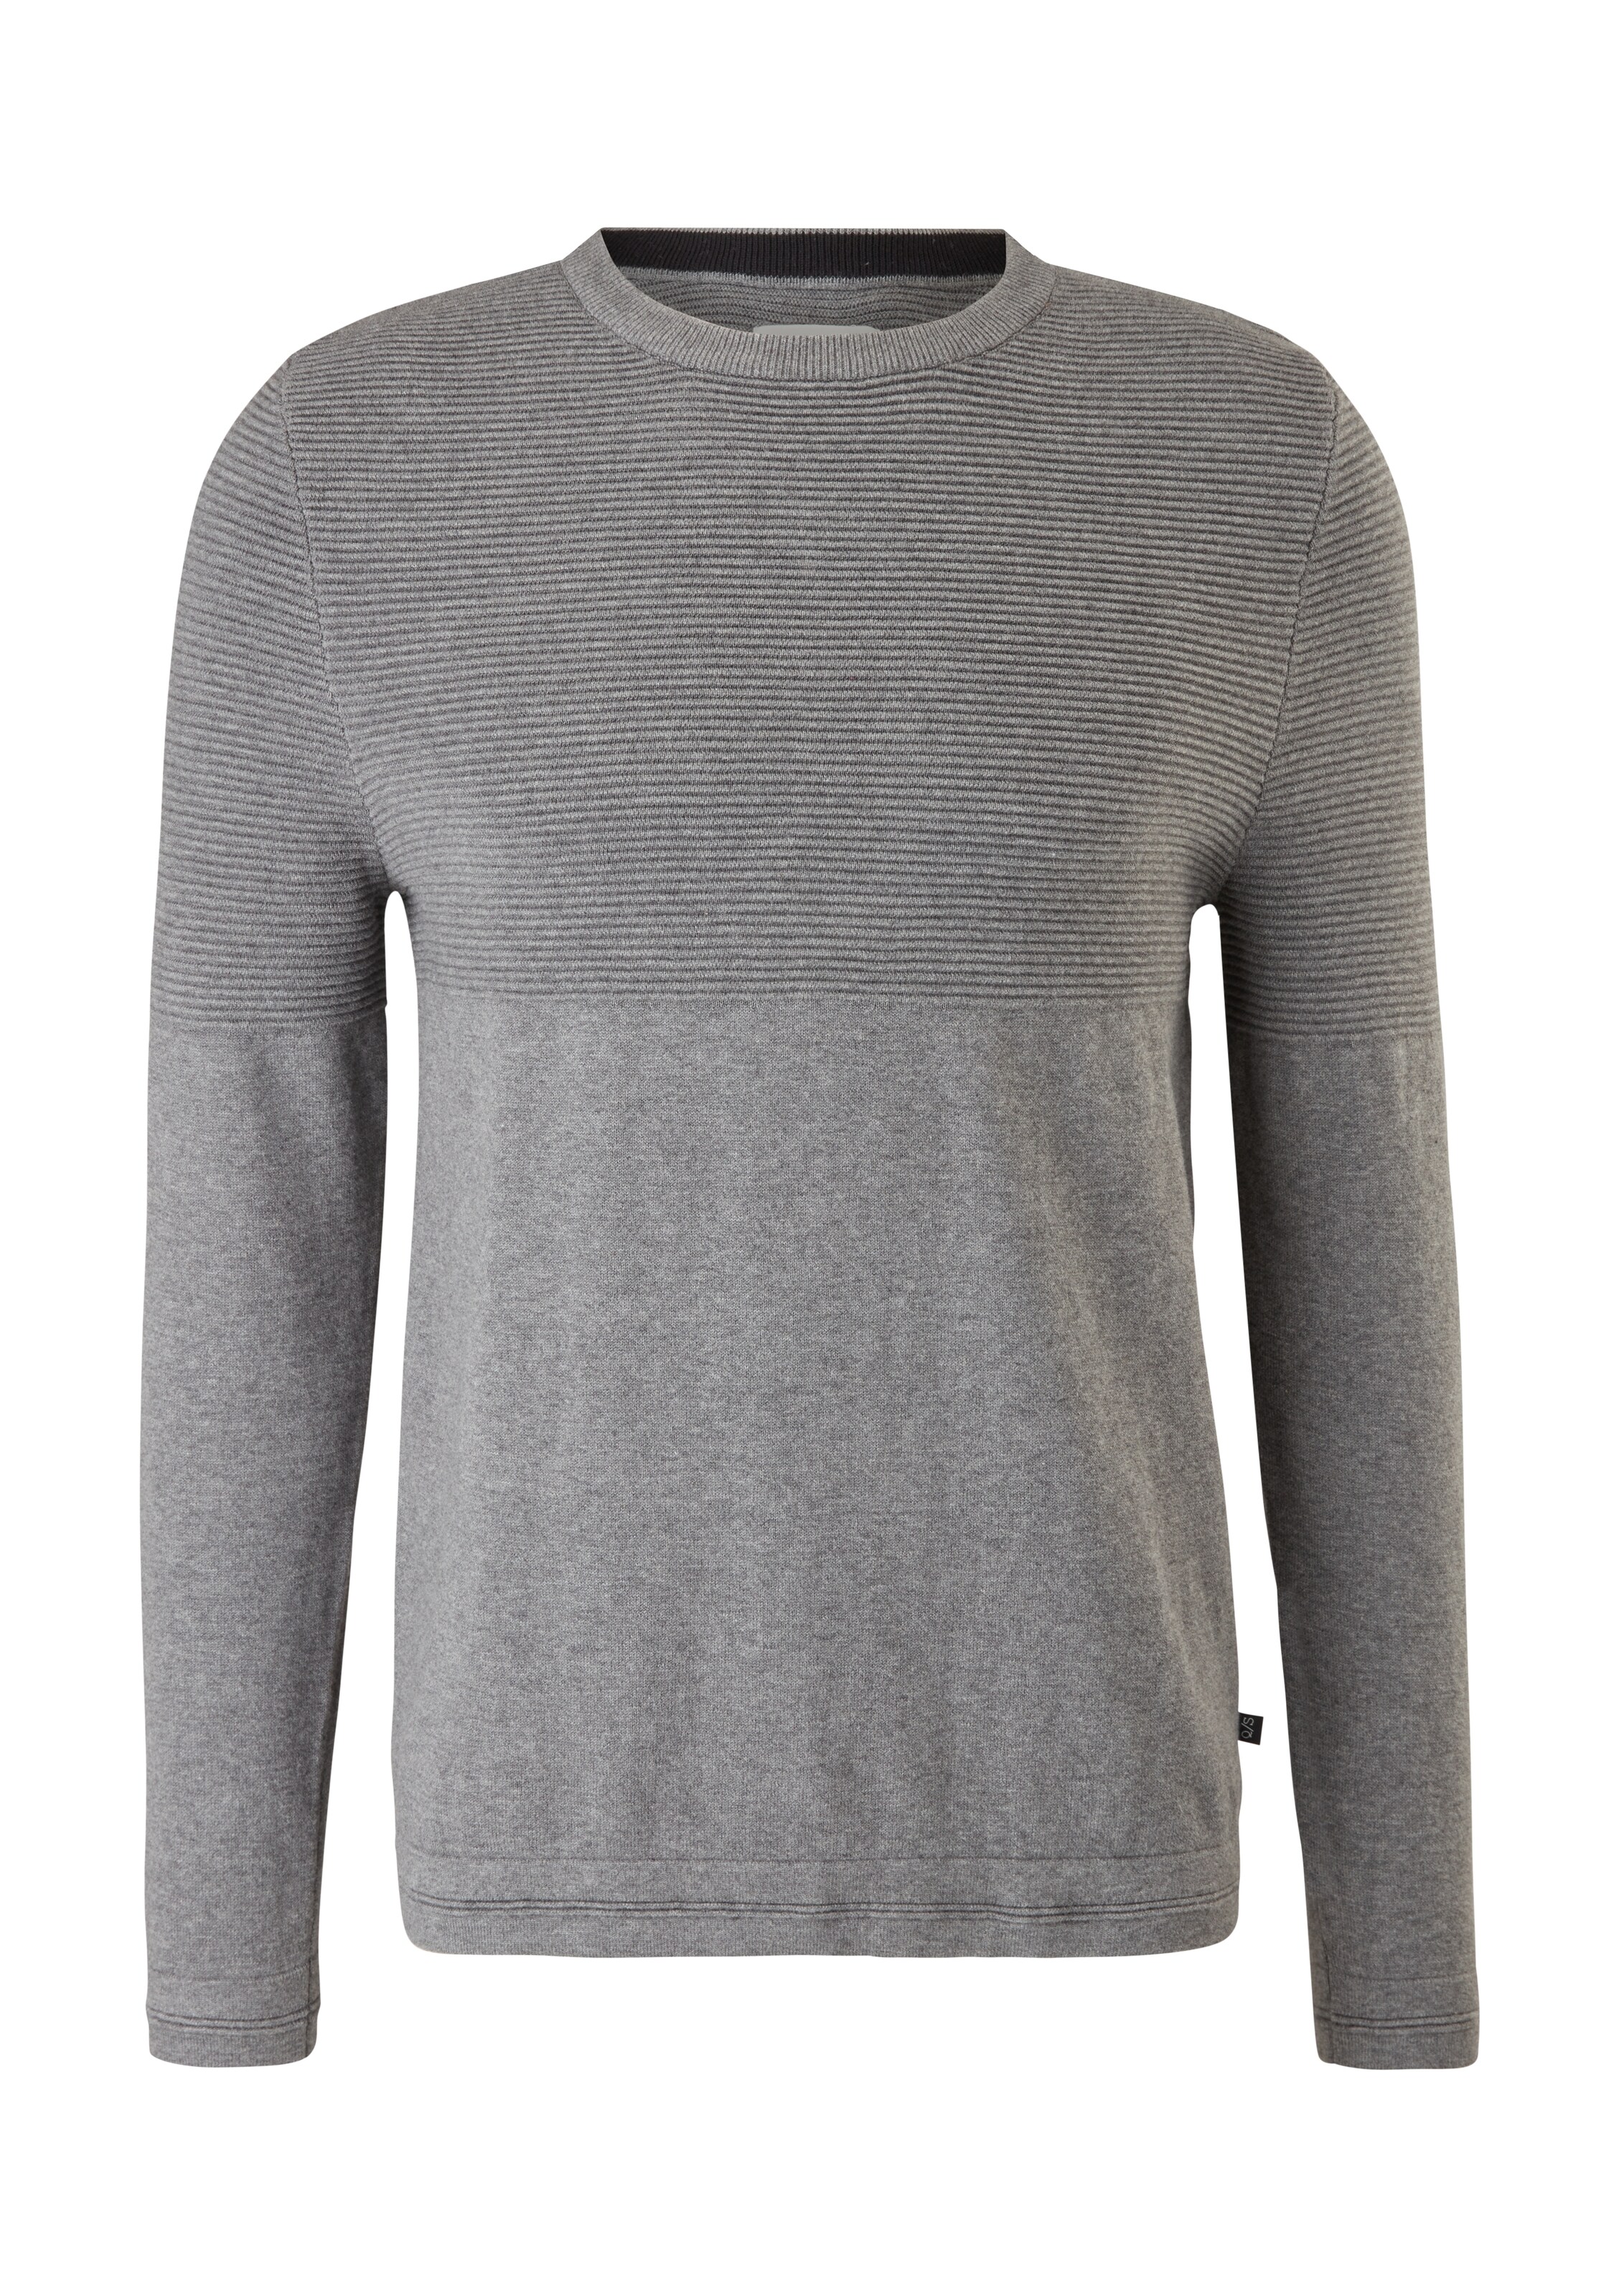 Homme Pull-over Q/S by s.Oliver en Gris Chiné 